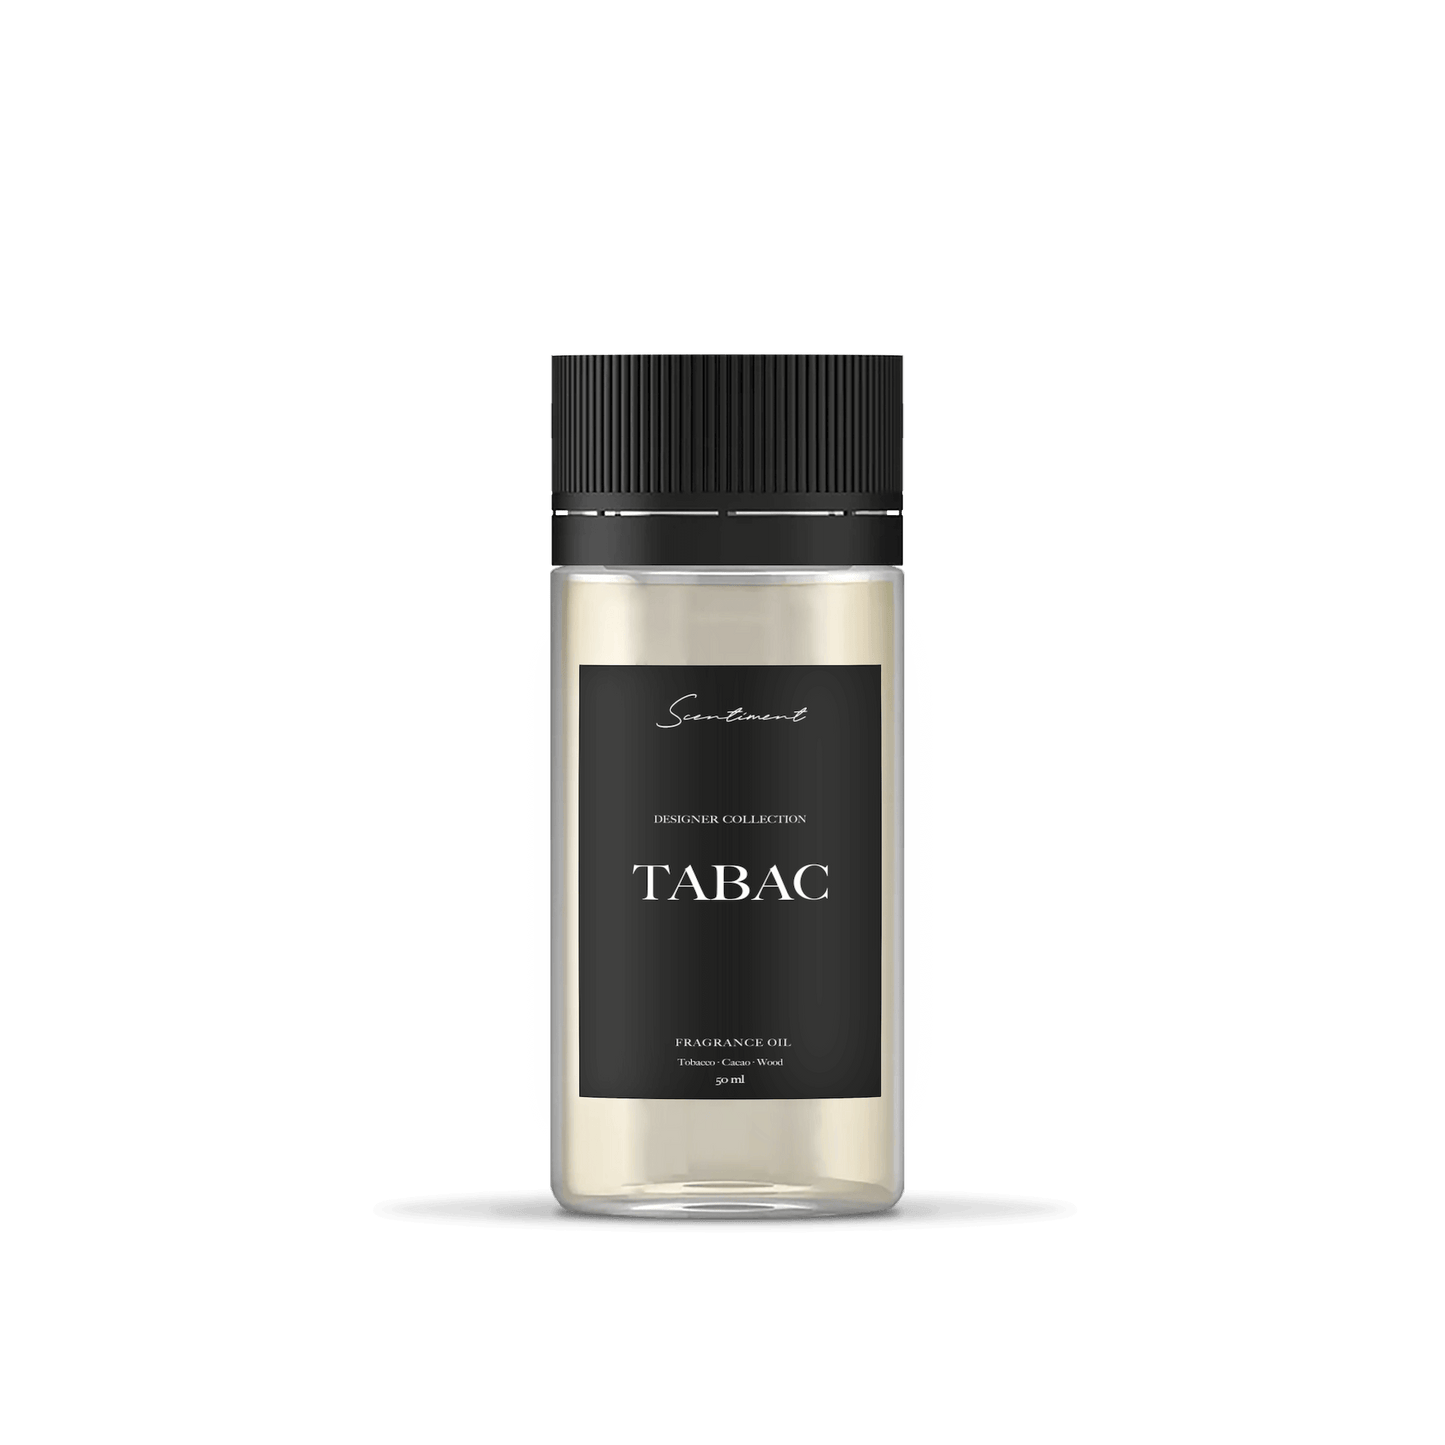 Tabac, inspired by Tobacco Vanille®, with notes of Tobacco, Cacao, and Wood.